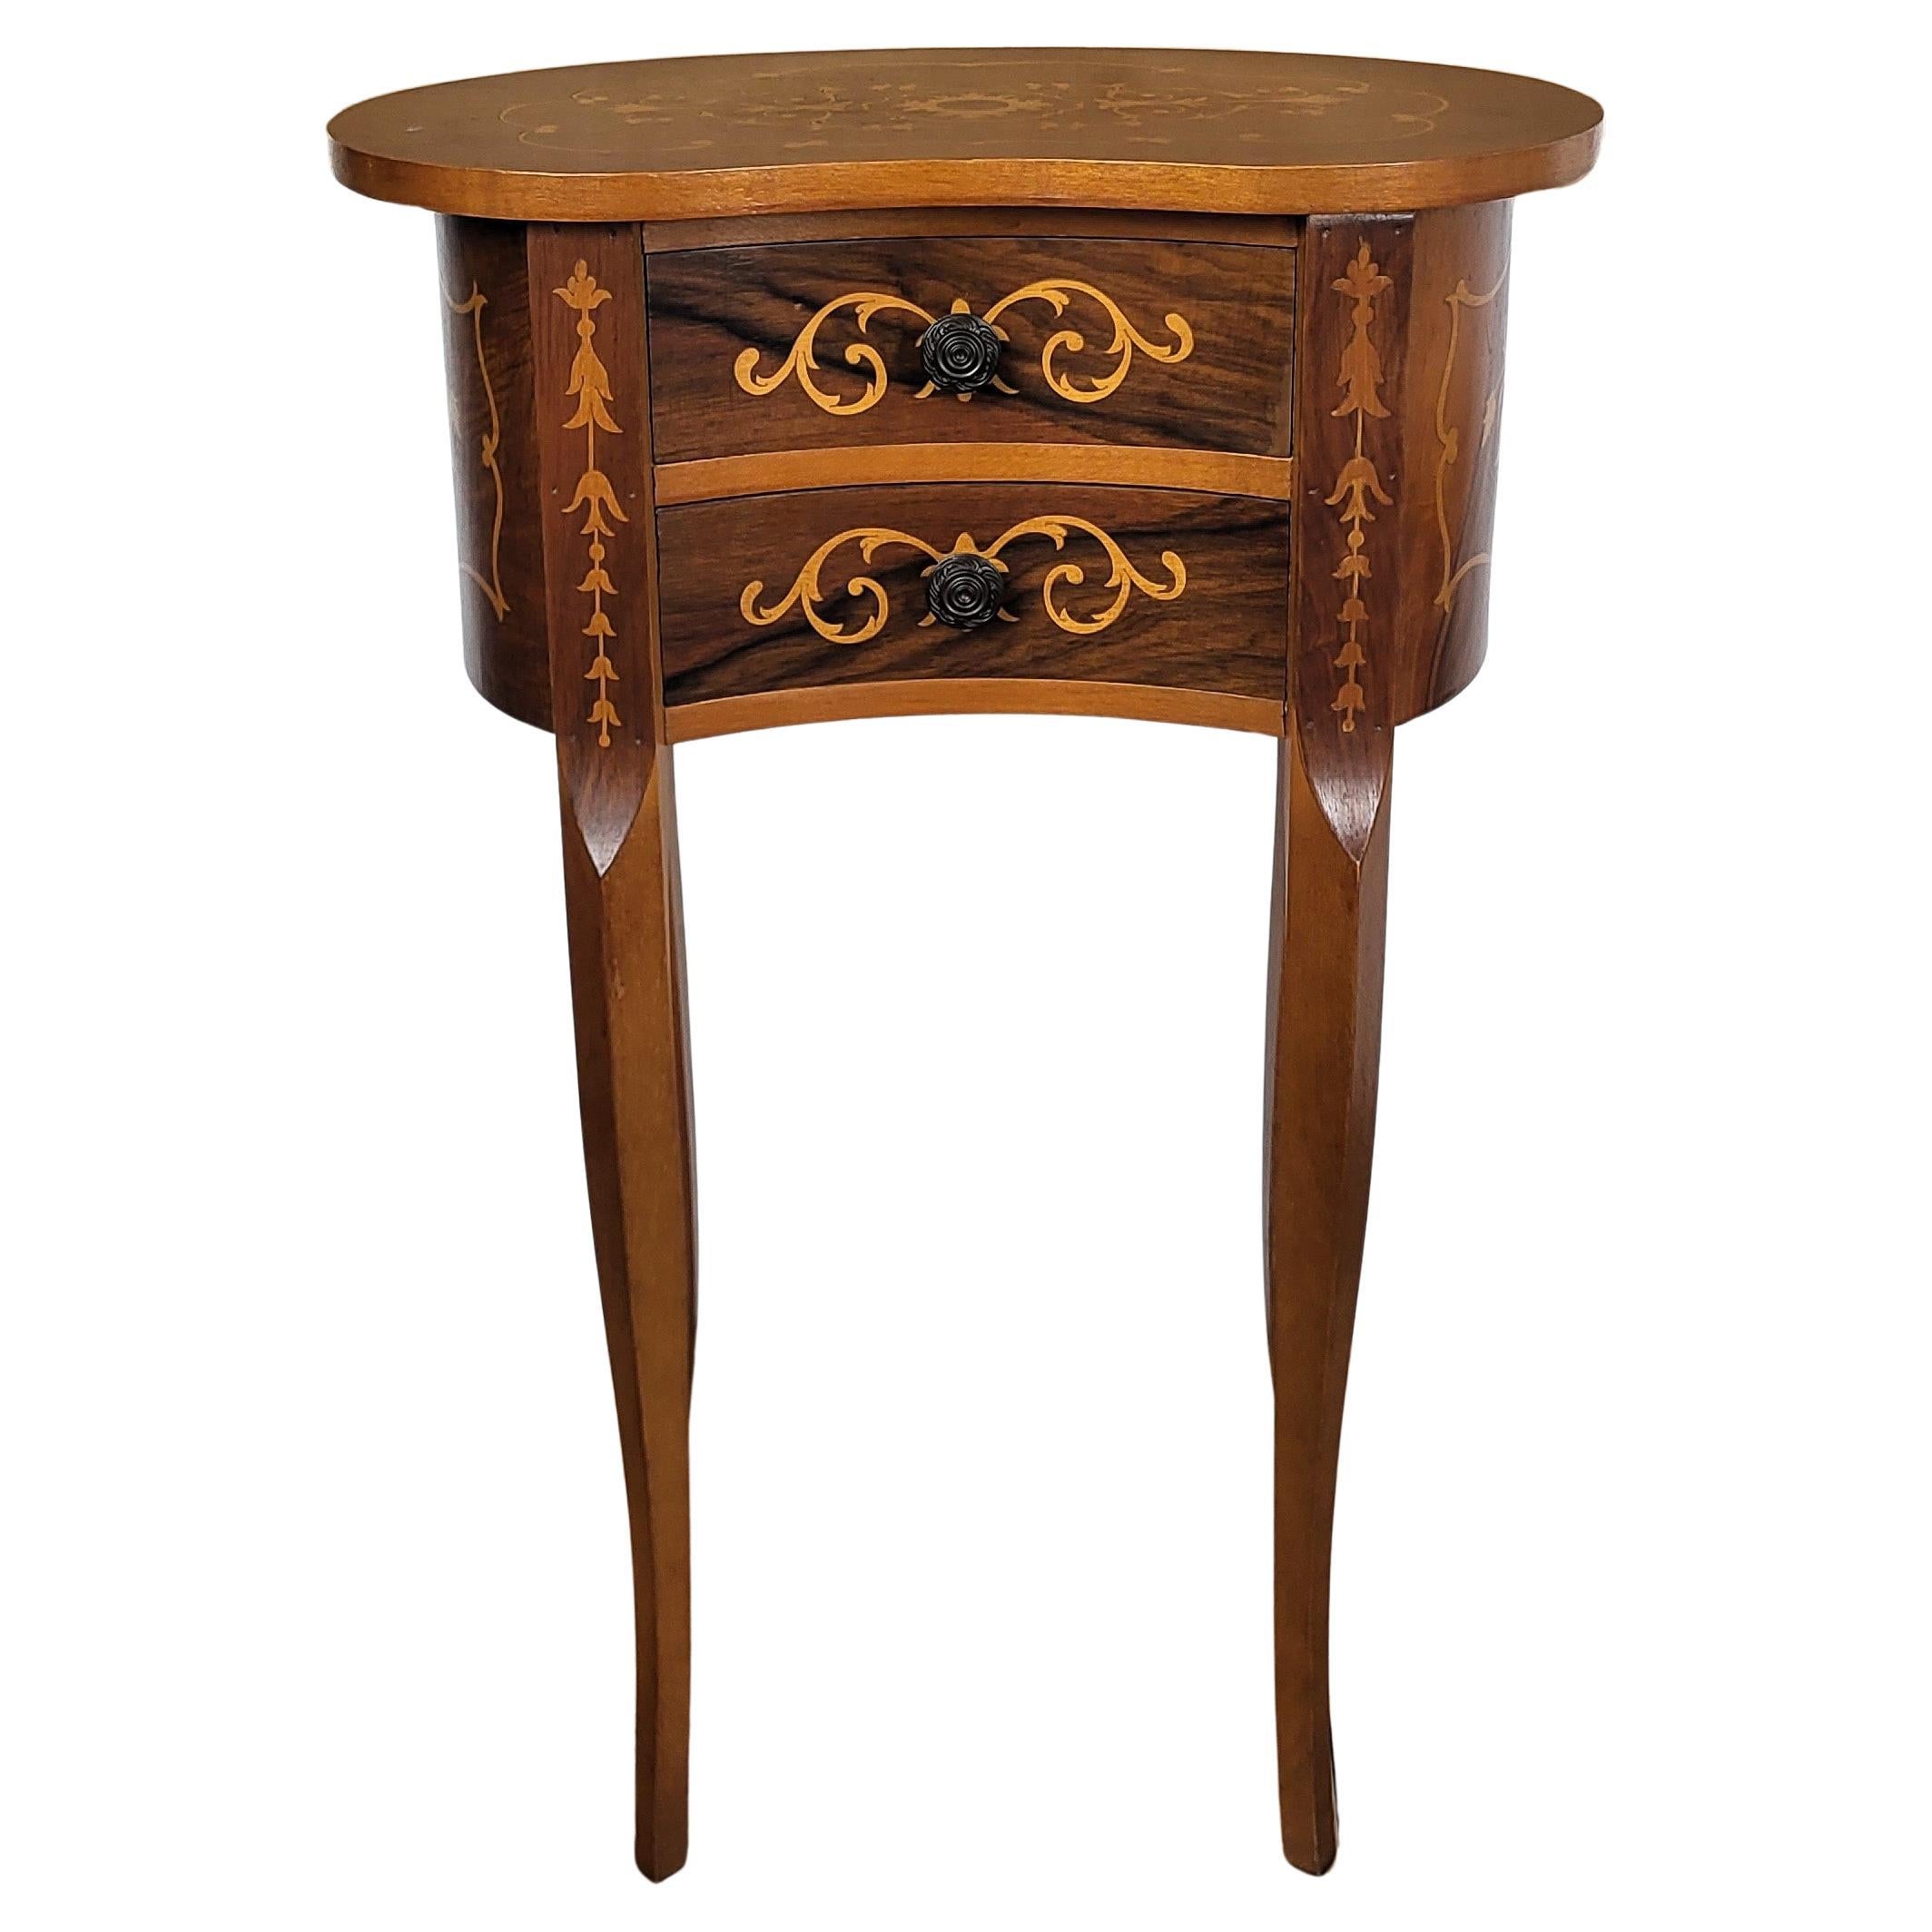 Italian Antique Marquetry Kidney Shaped Walnut Side Table with Two Drawers For Sale